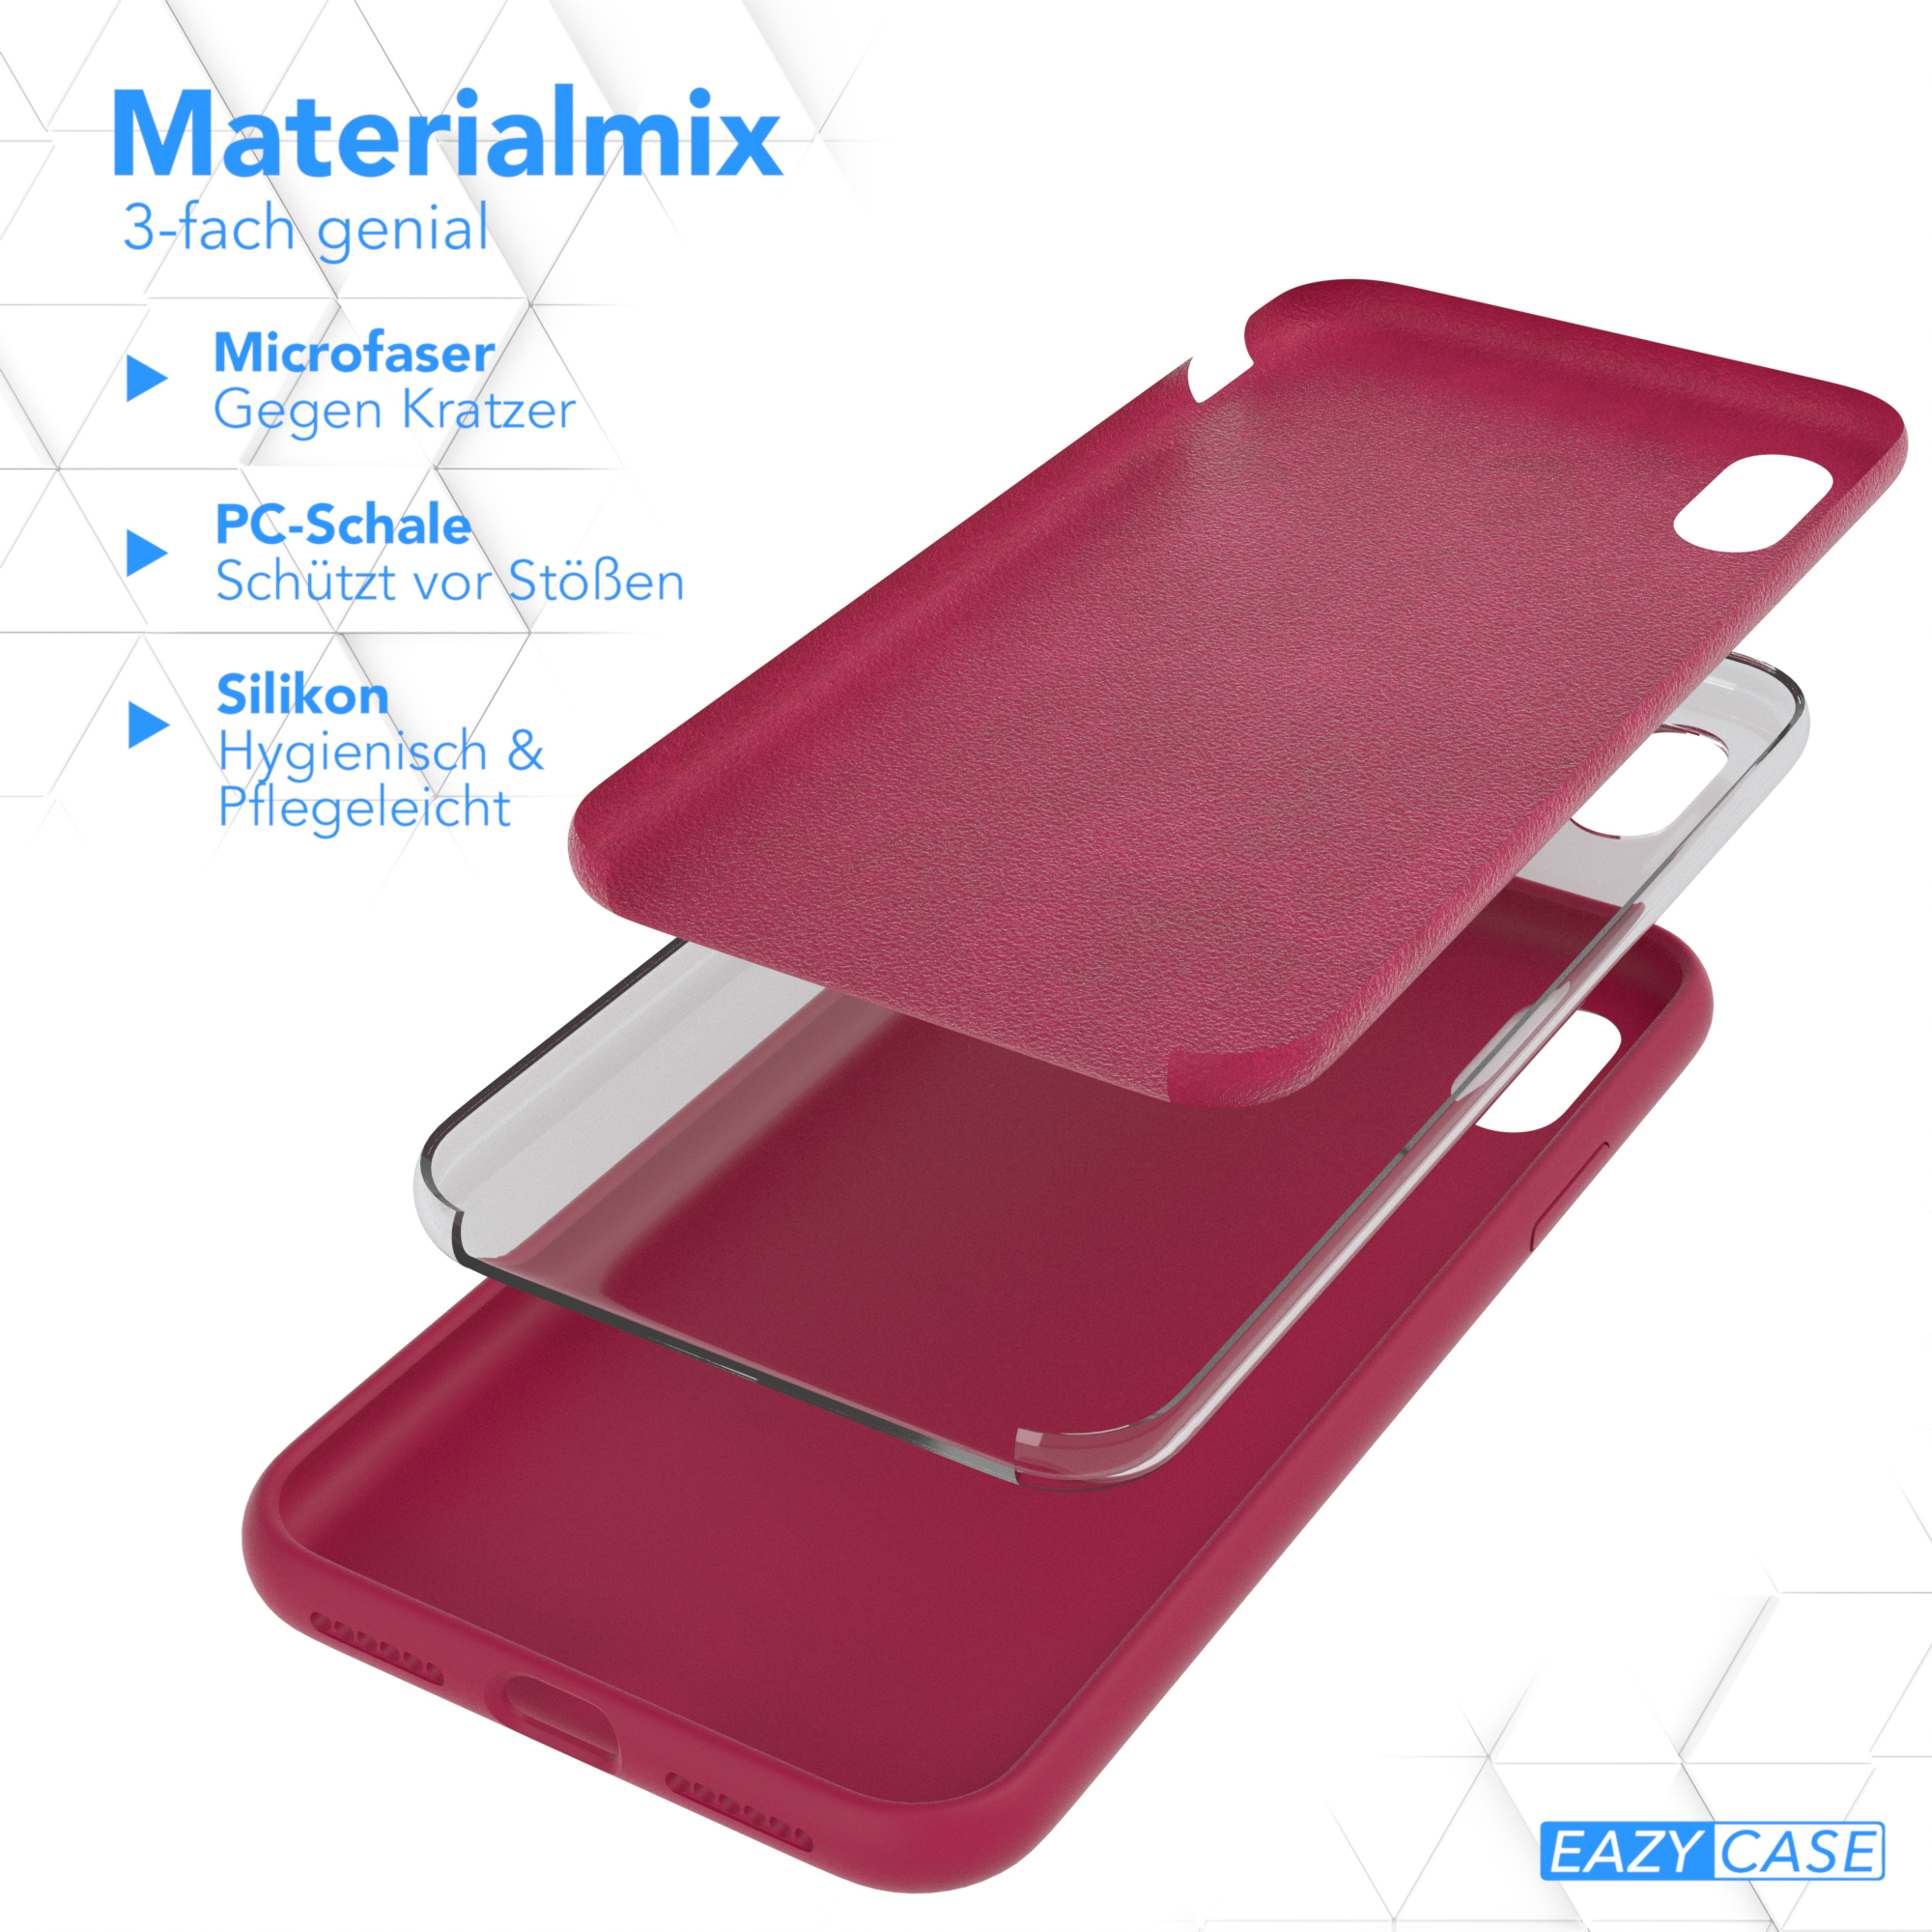 Beere Apple, CASE Silikon Max, Rot Premium / EAZY Backcover, Handycase, iPhone XS